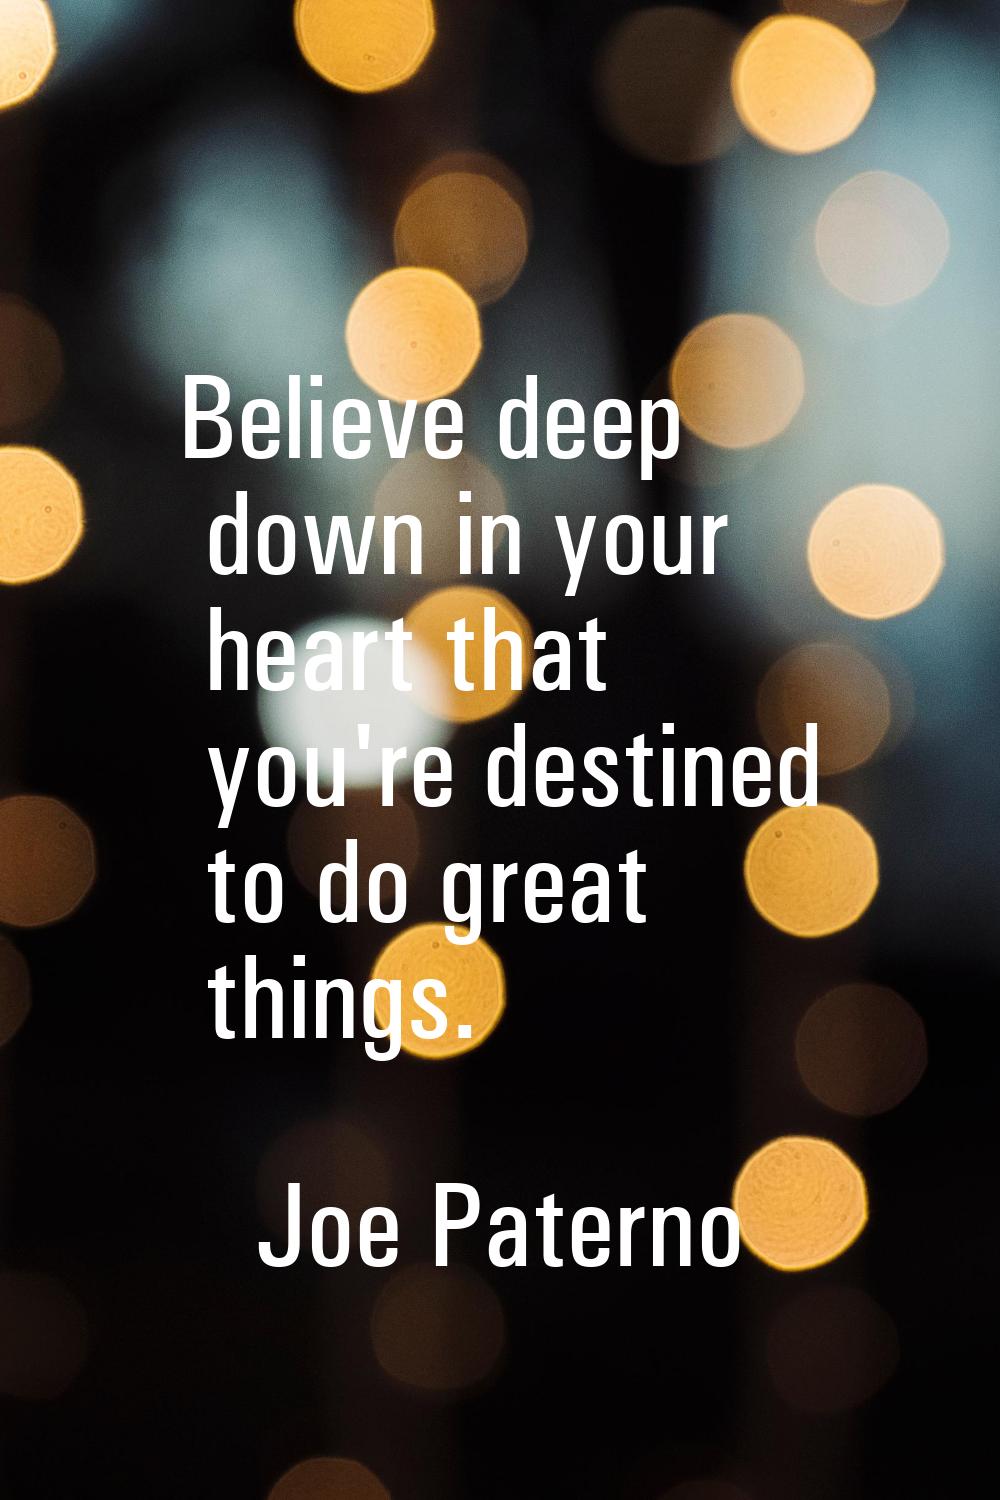 Believe deep down in your heart that you're destined to do great things.